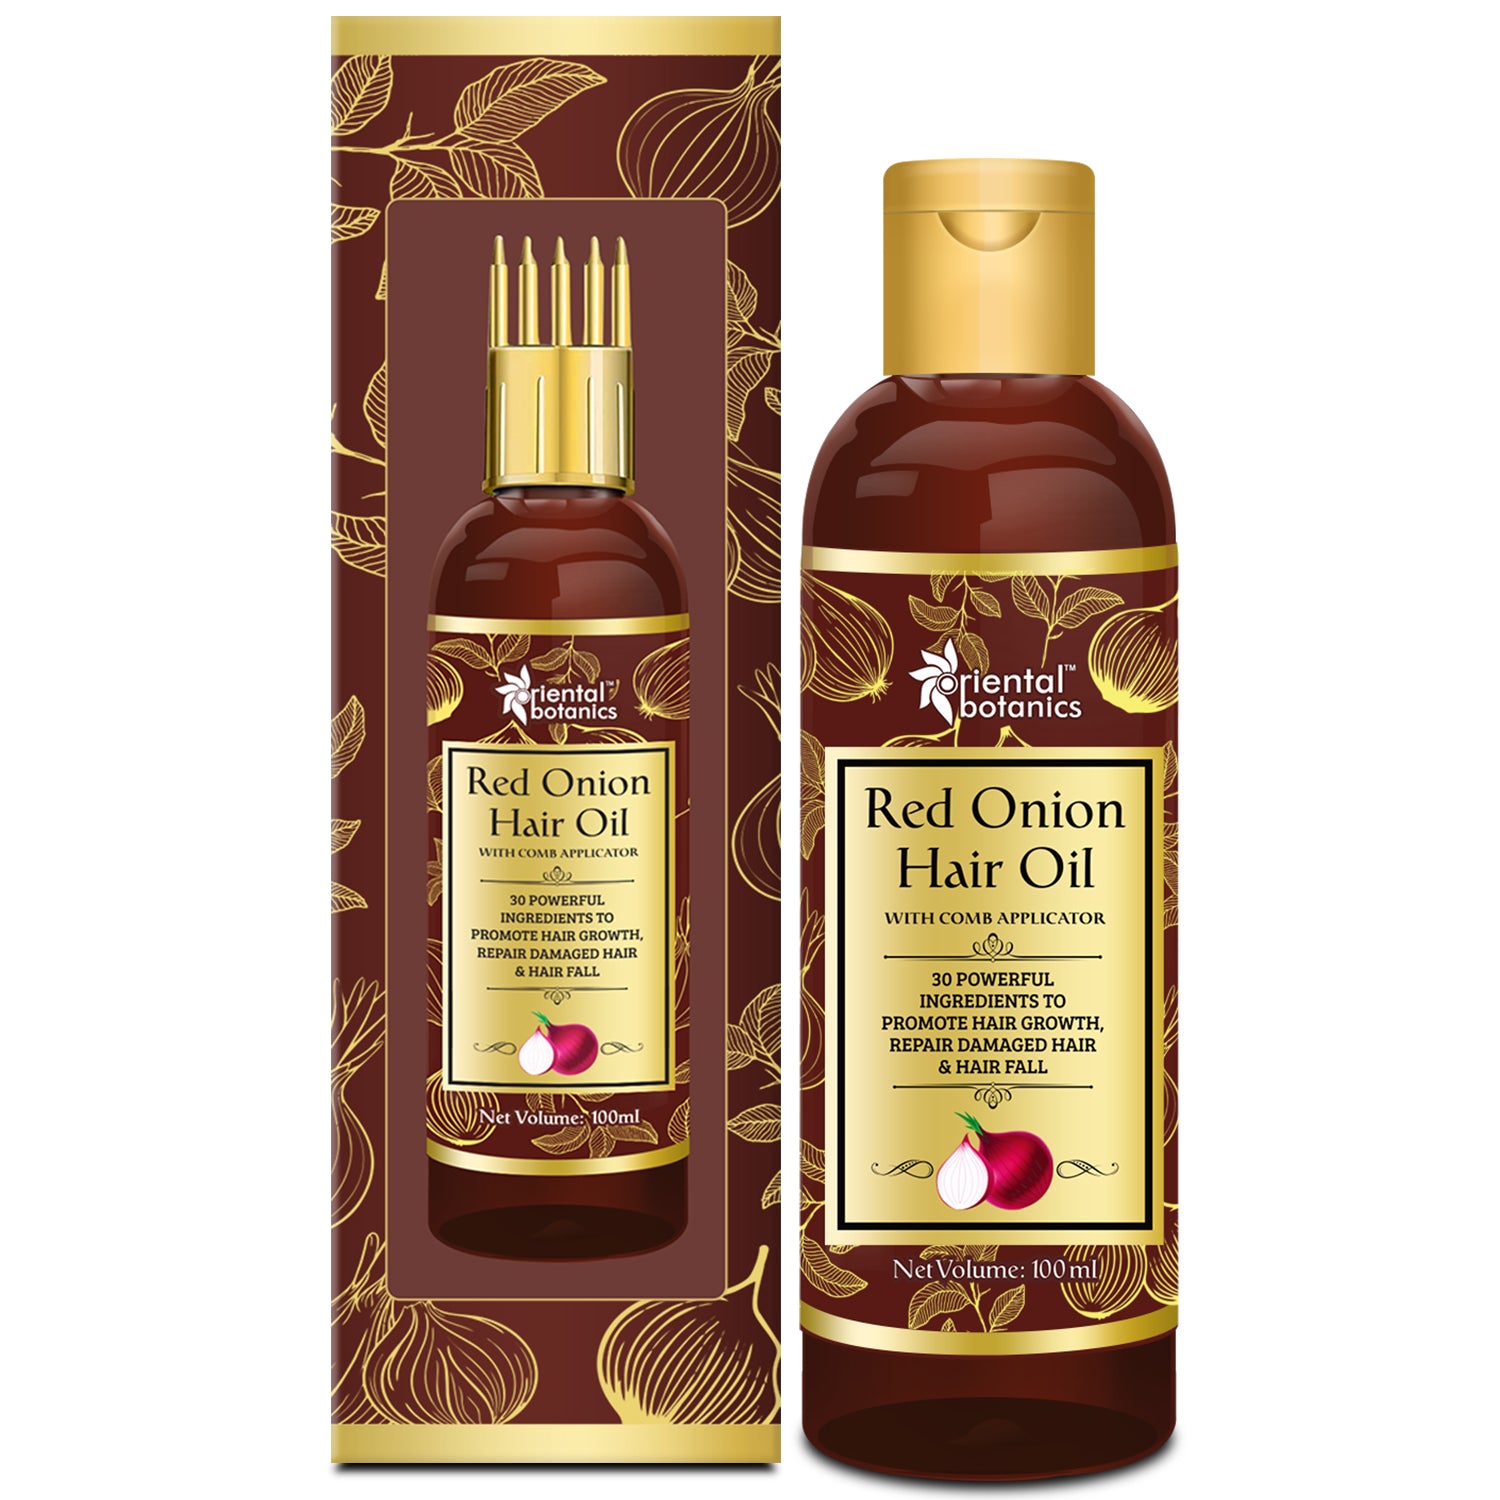 Oriental Botanics Red Onion Hair Oil With Comb Applicator - With 30 Oils & Extracts For Stronger Growth and To Control Hair Fall, 100 ml, 100ml + comb applicator